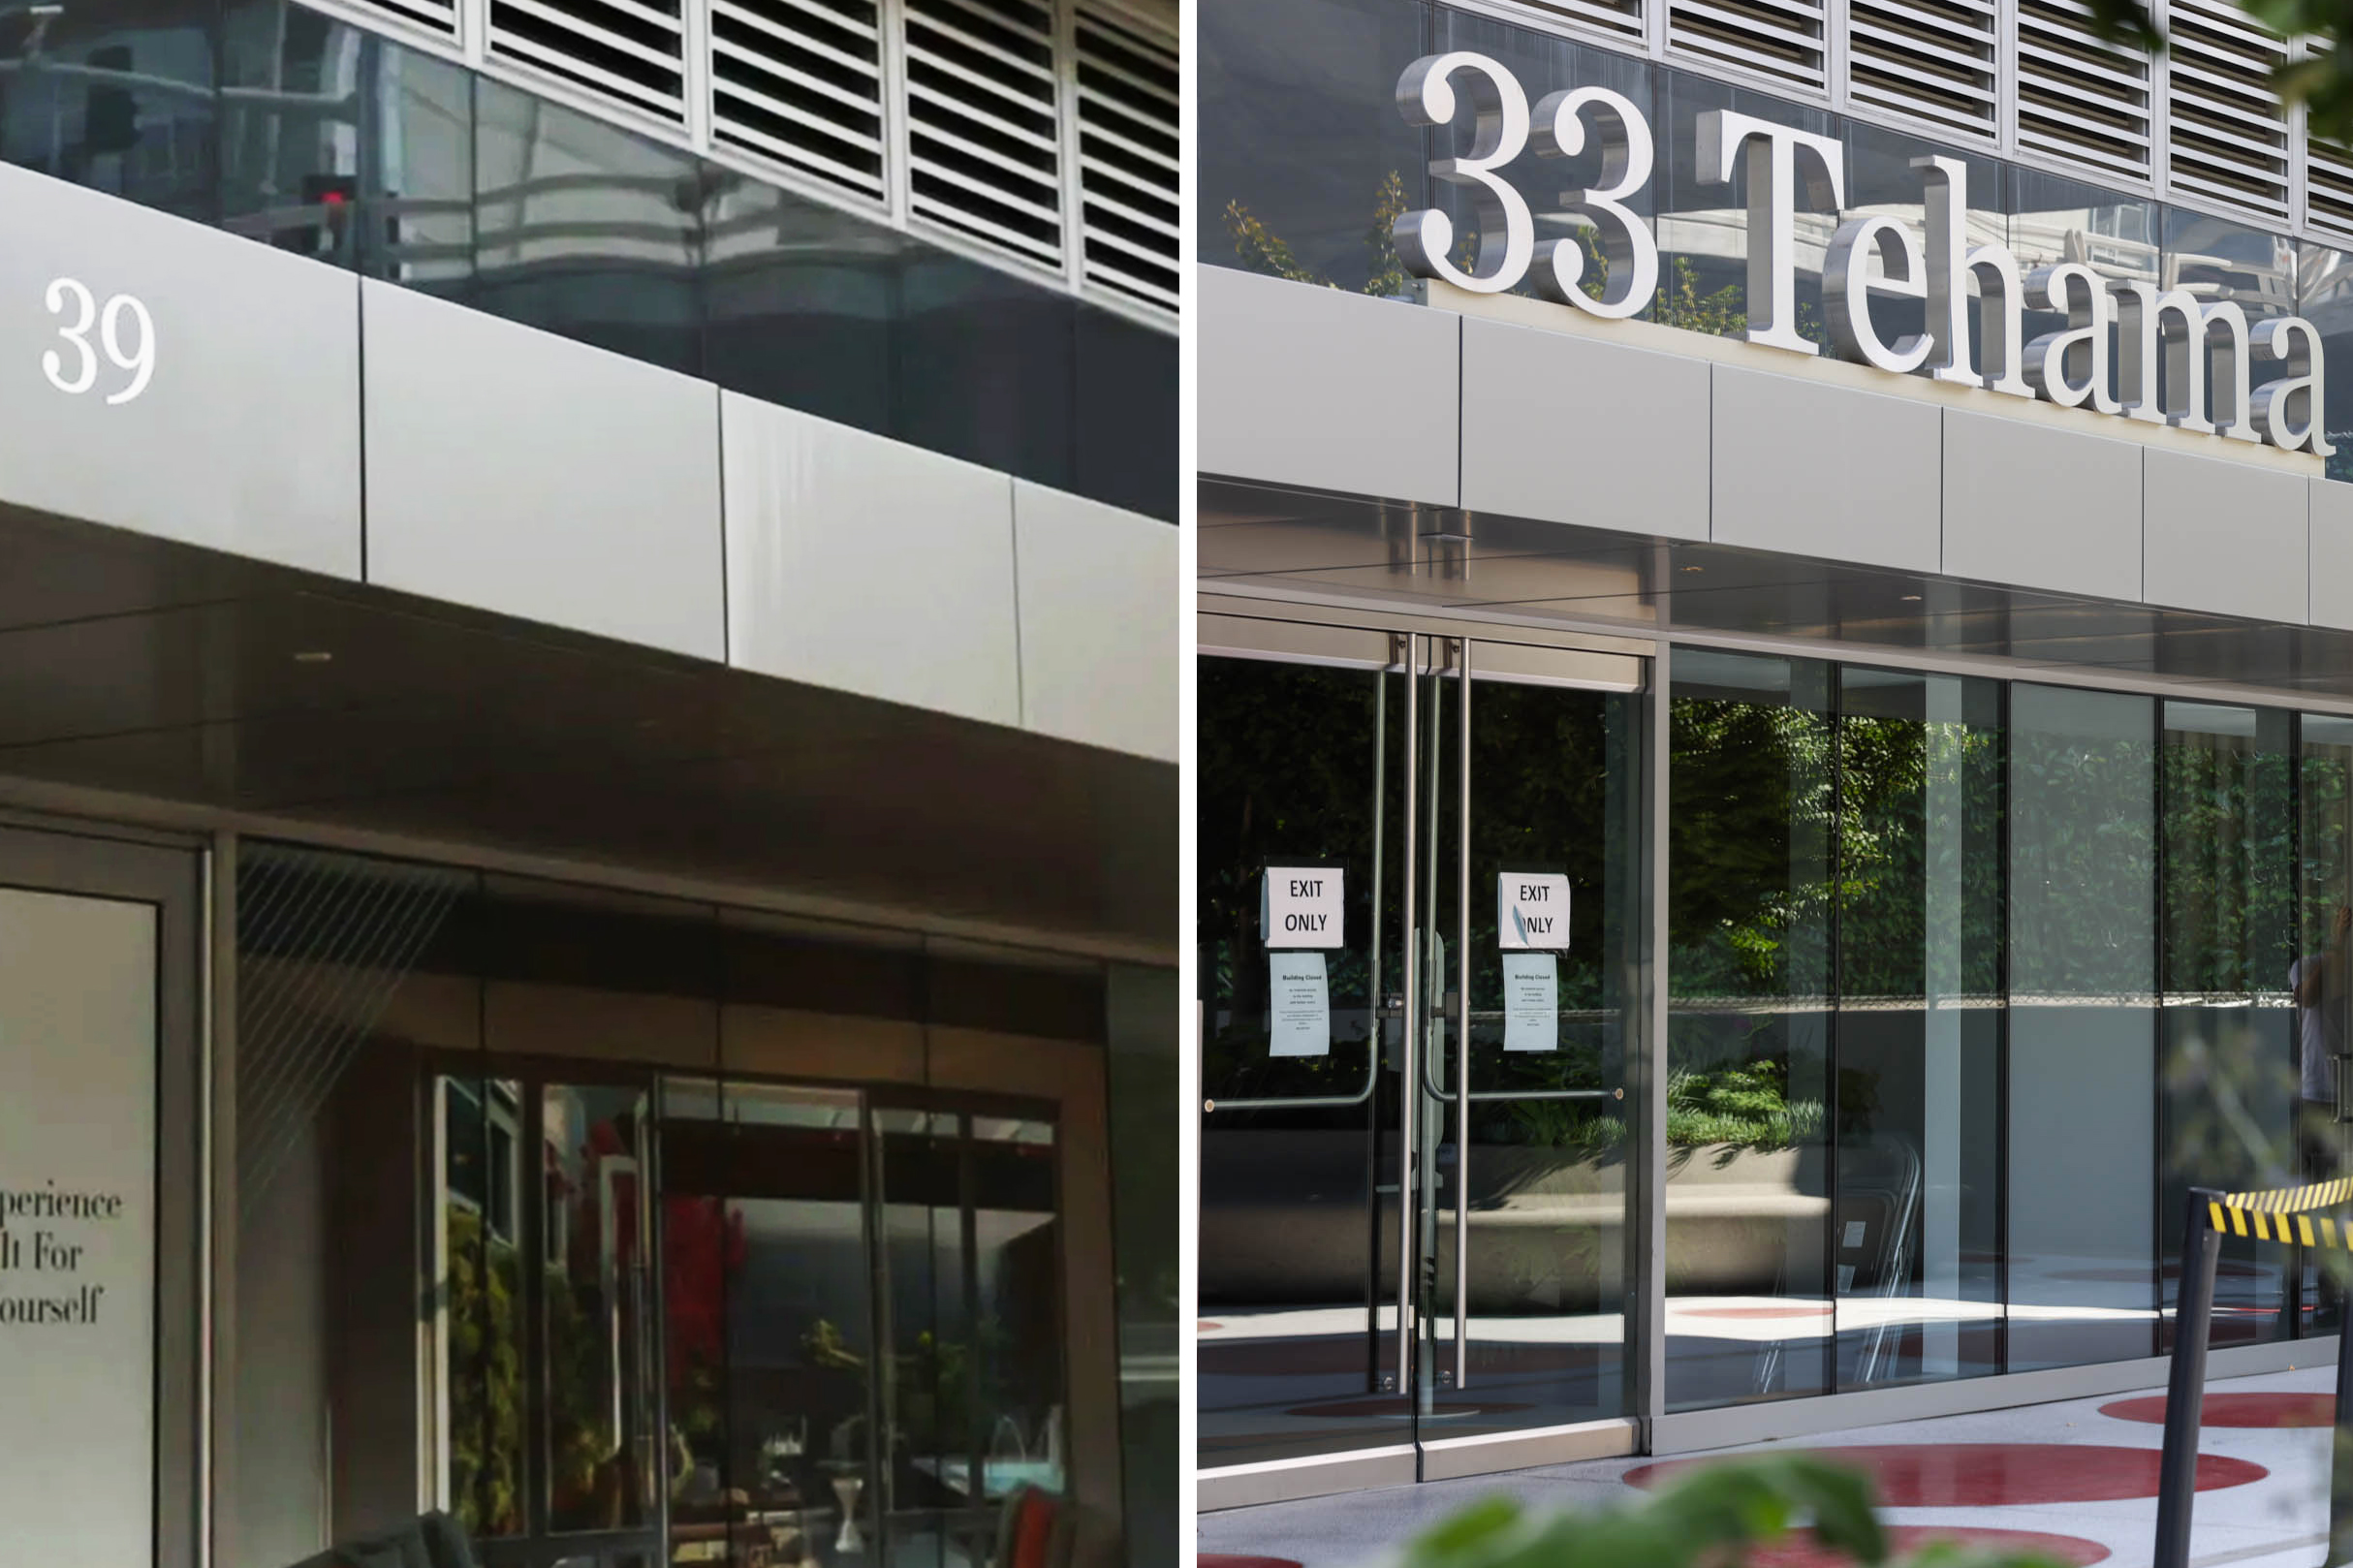 The image shows two building entrances with metal and glass facades. One entrance is labeled "39" and the other is labeled "33 Tehama."